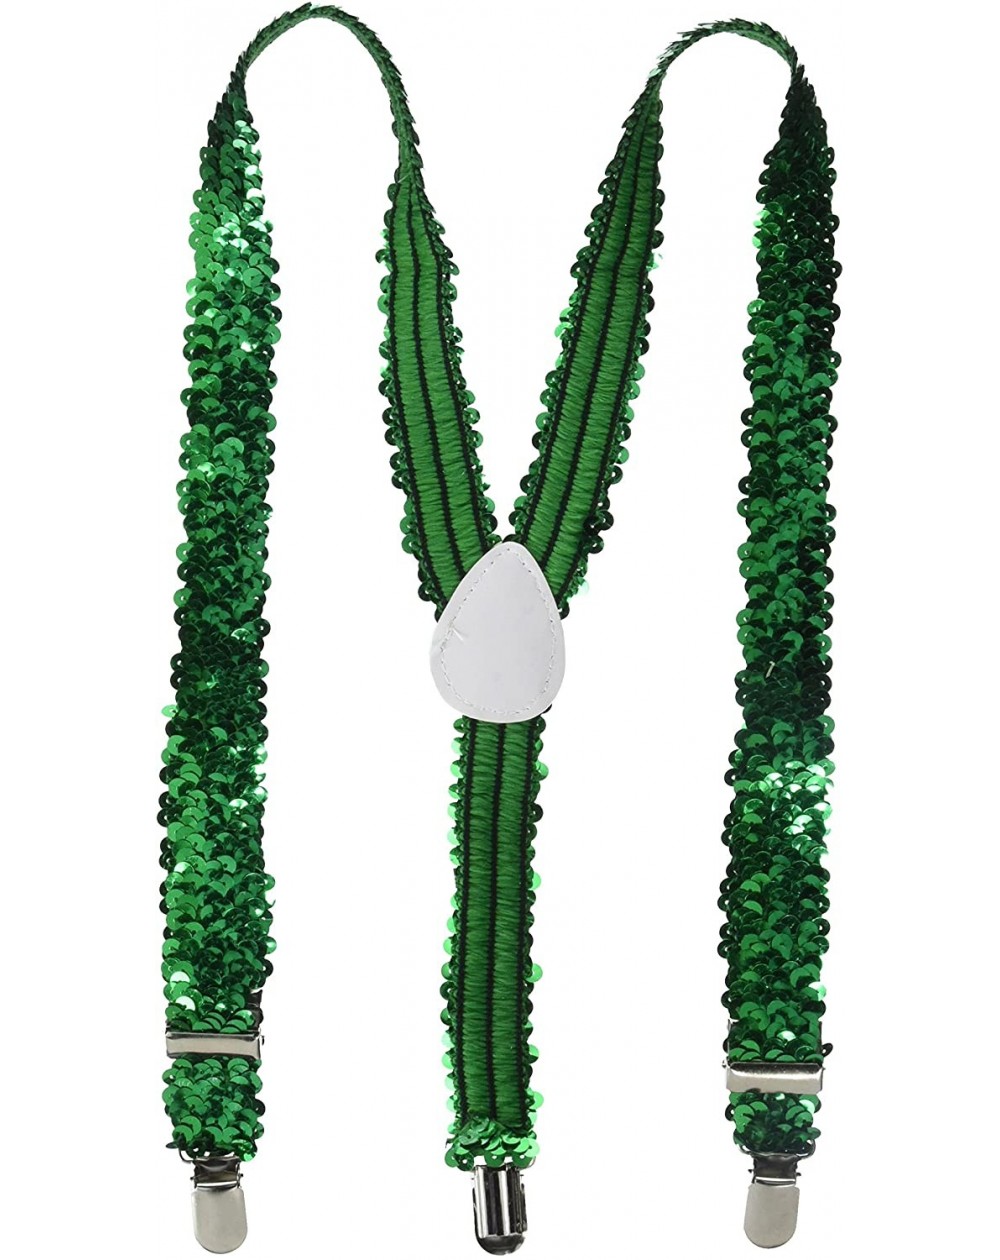 Favors Sequined Suspenders (green adjustable) Party Accessory (1 count) (1/Pkg) - Green - CX115Y1R4VP $20.86